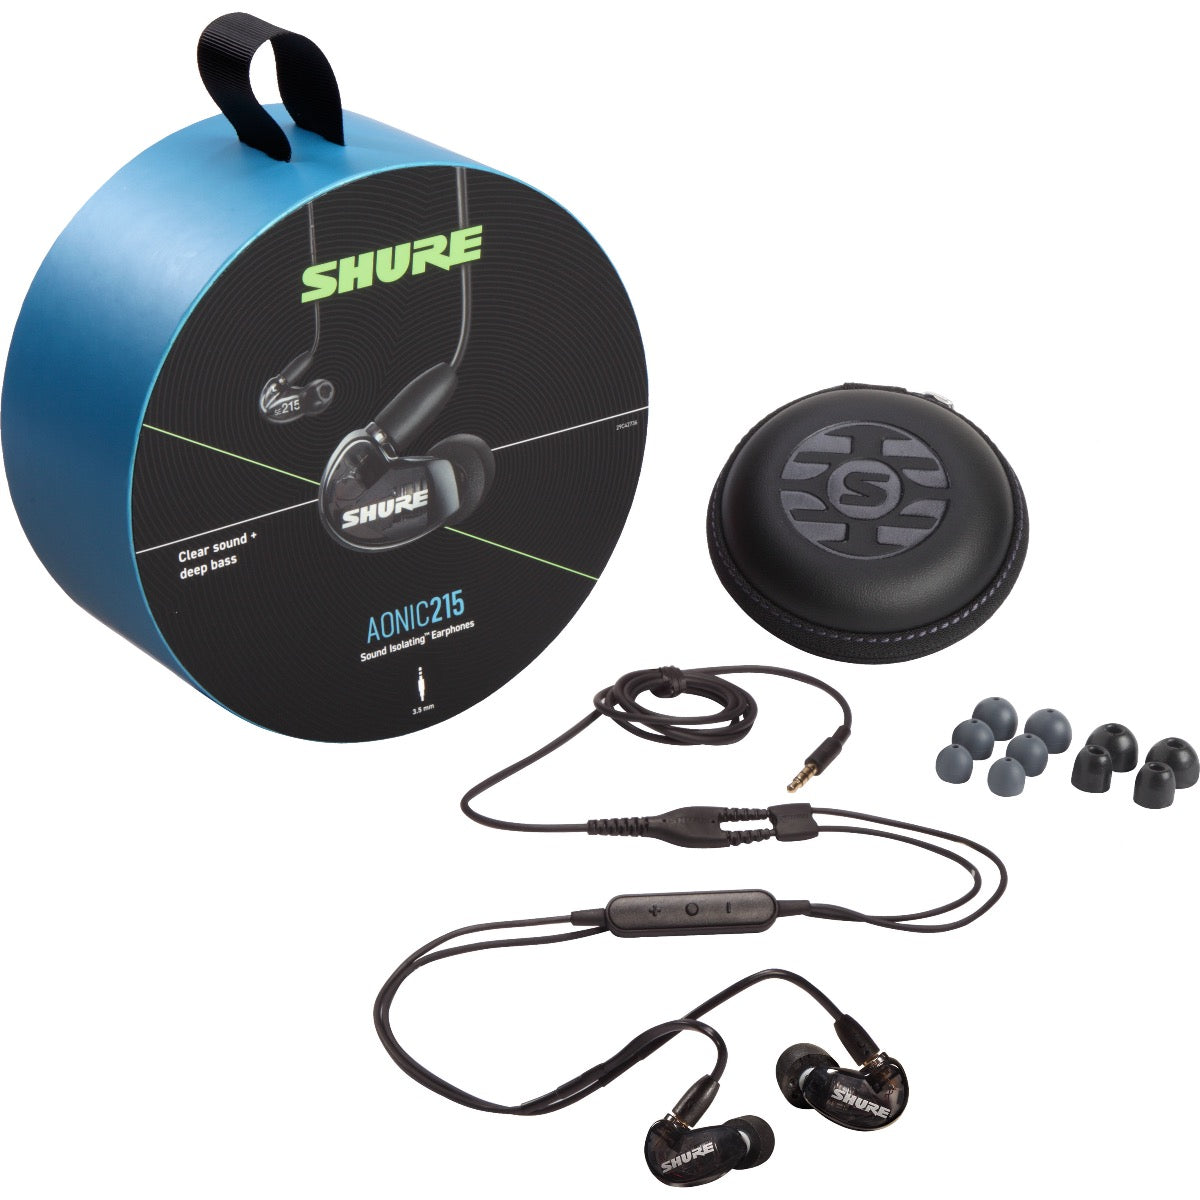 3/4 view of Shure AONIC 215 Sound Isolating Earphones - Black packaging and components showing top, front and left sides